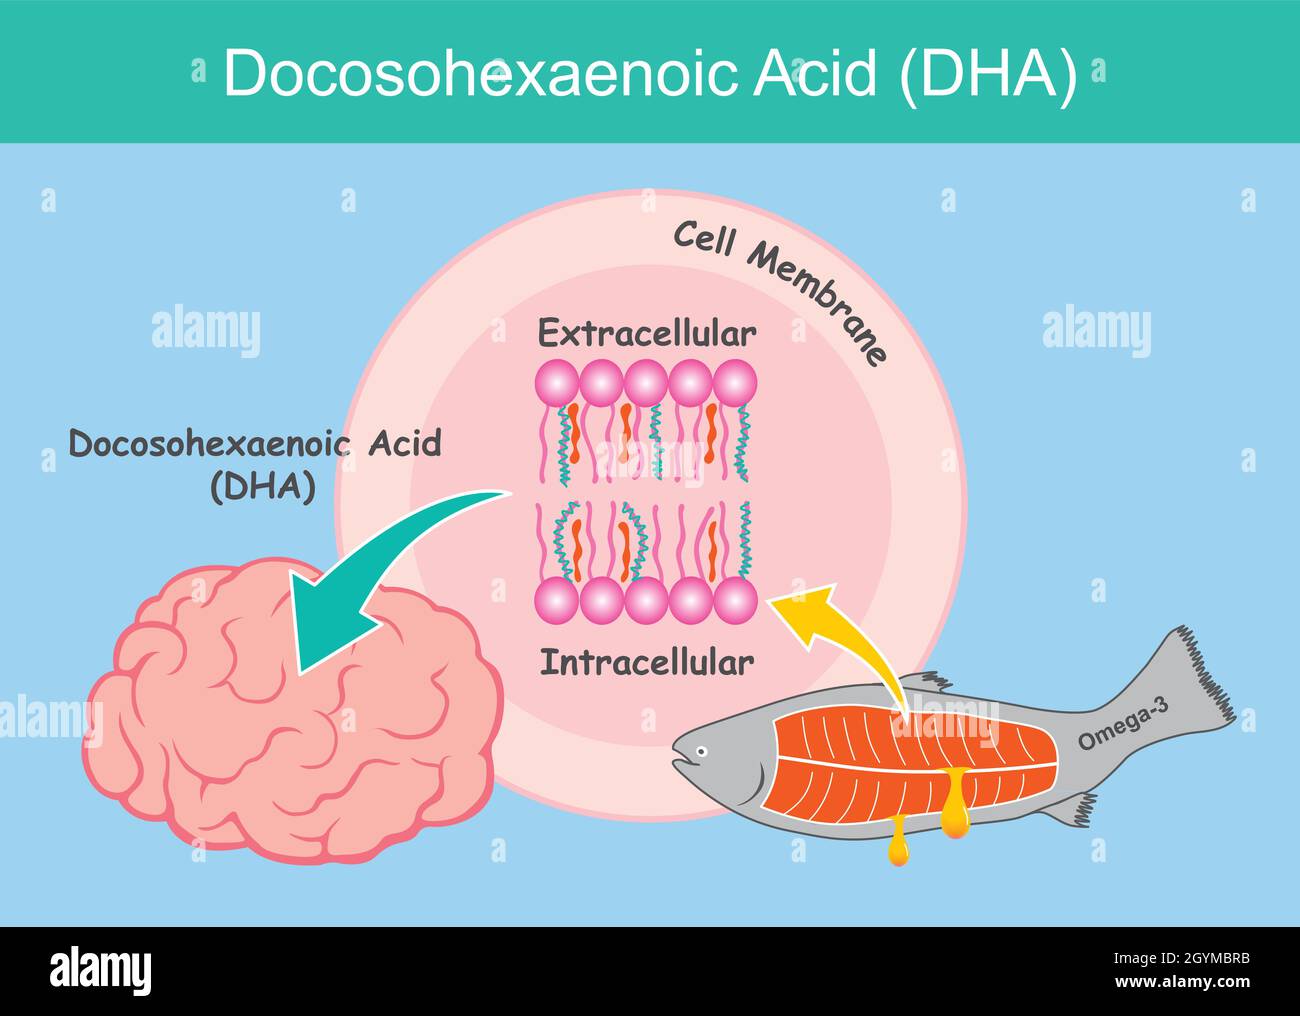 Docosohexaenoic acid (DHA). Illustration showing about benefit of DHA acid to a kid brain cells Stock Vector